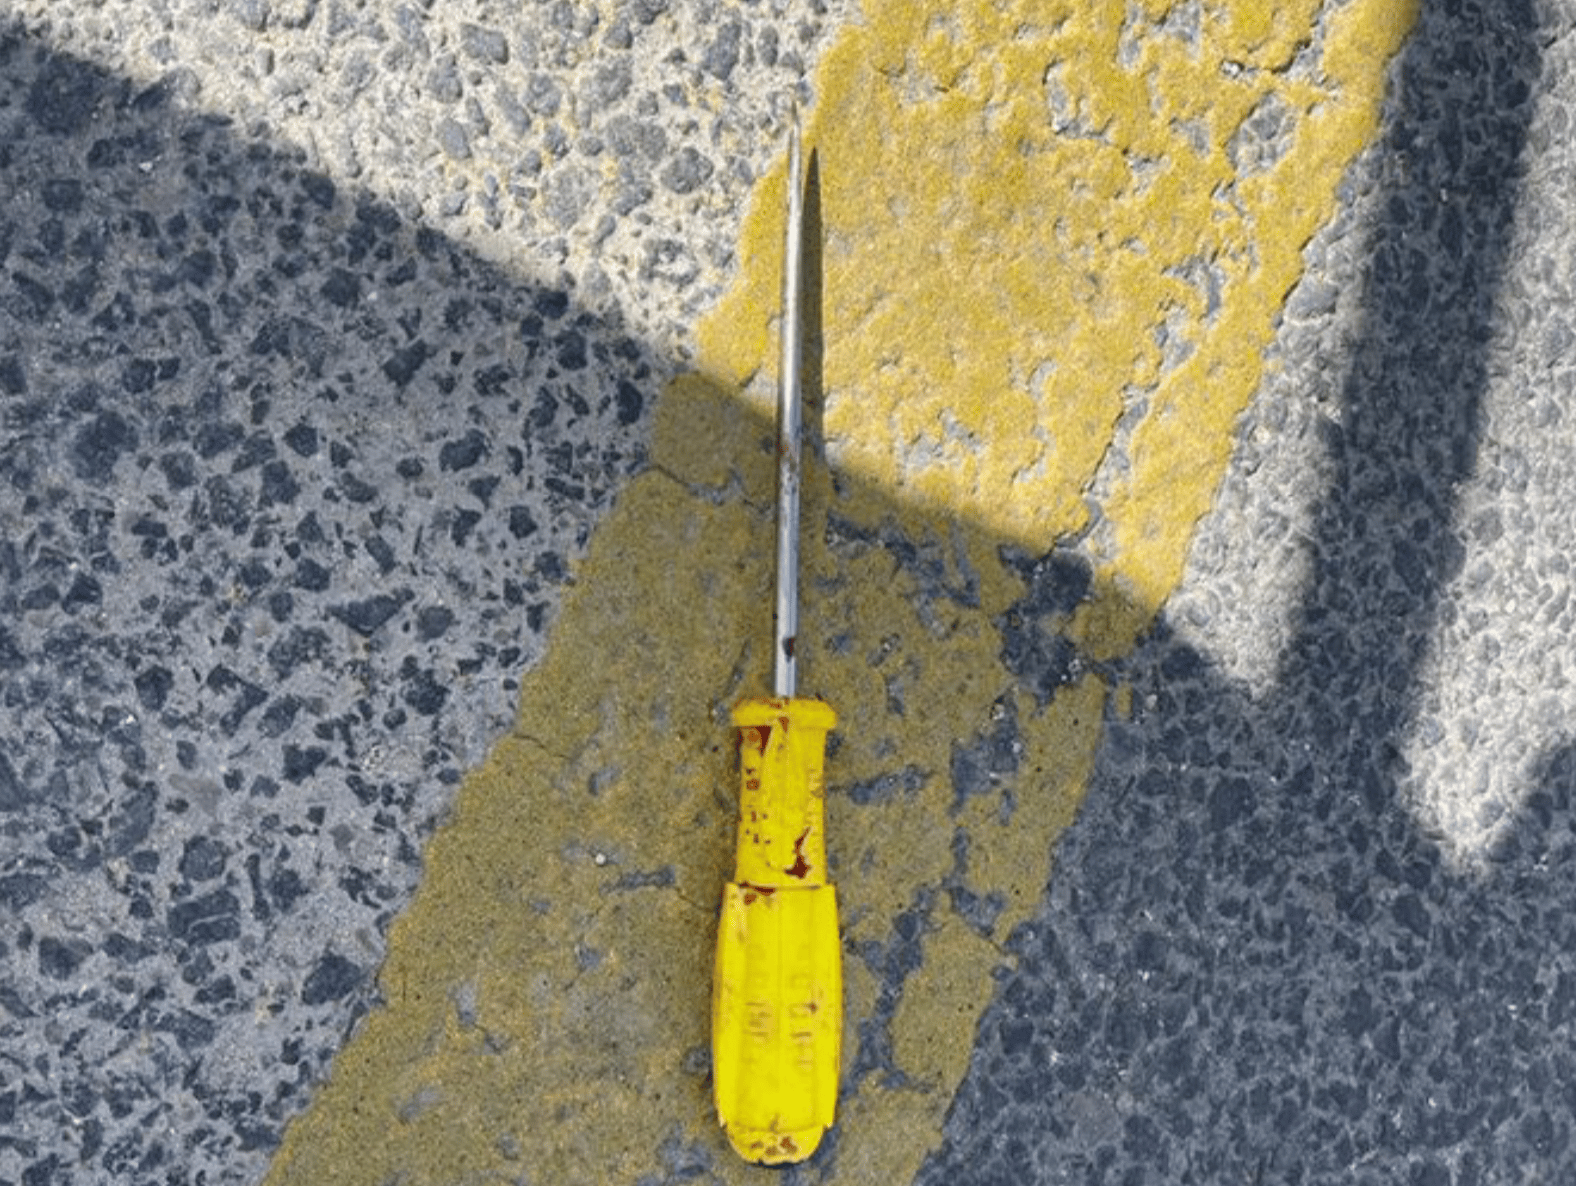 Lone Knife Attack (Screwdriver) Neve Daniel Junction in Gush Etzion Settlement in Southern West Bank, Palestine - 31 March 2022